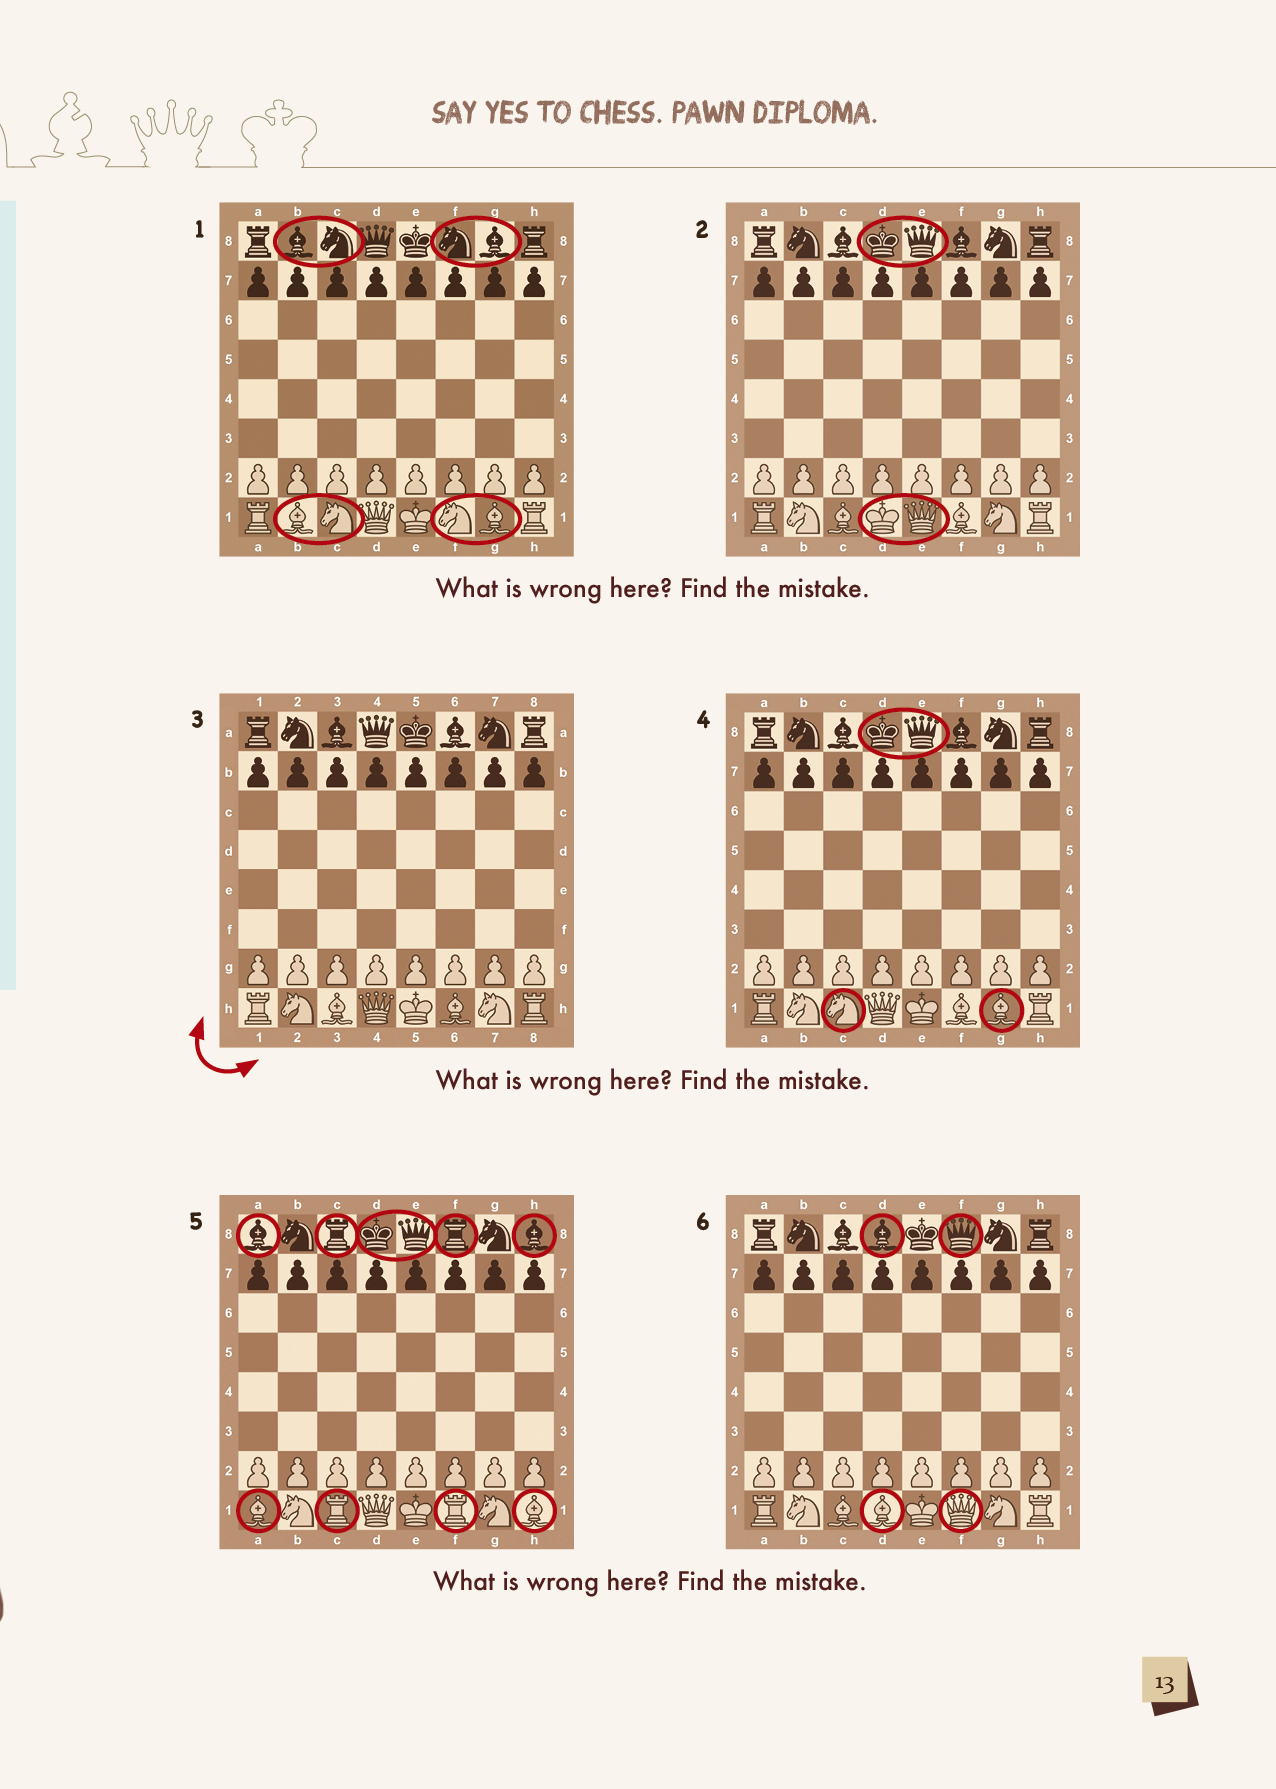 sayyes2chess_solutions_page_13.jpg